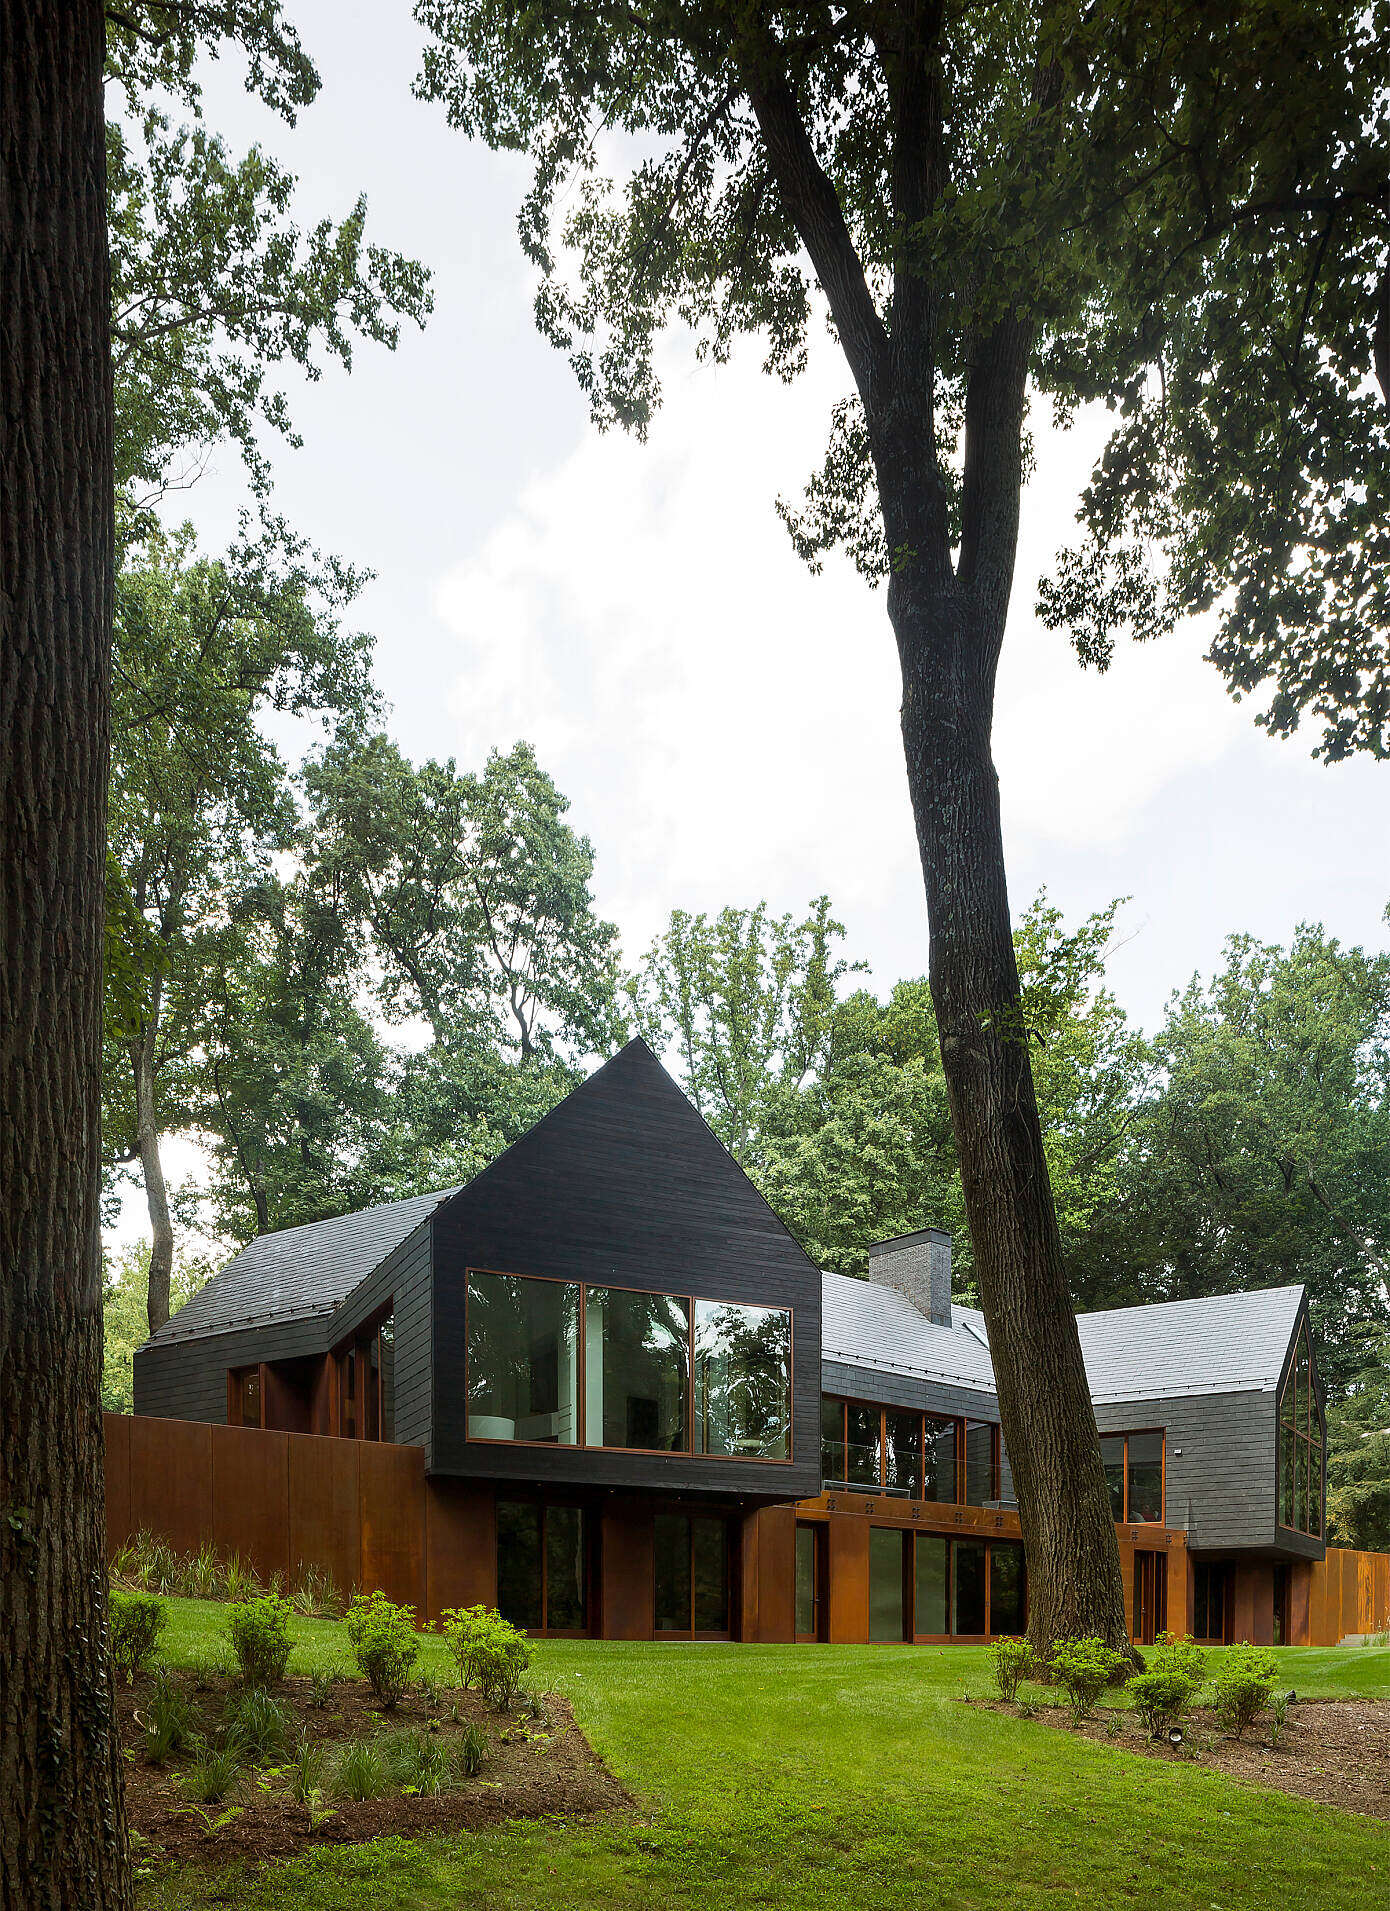 Slate House by Ziger|Snead Architects